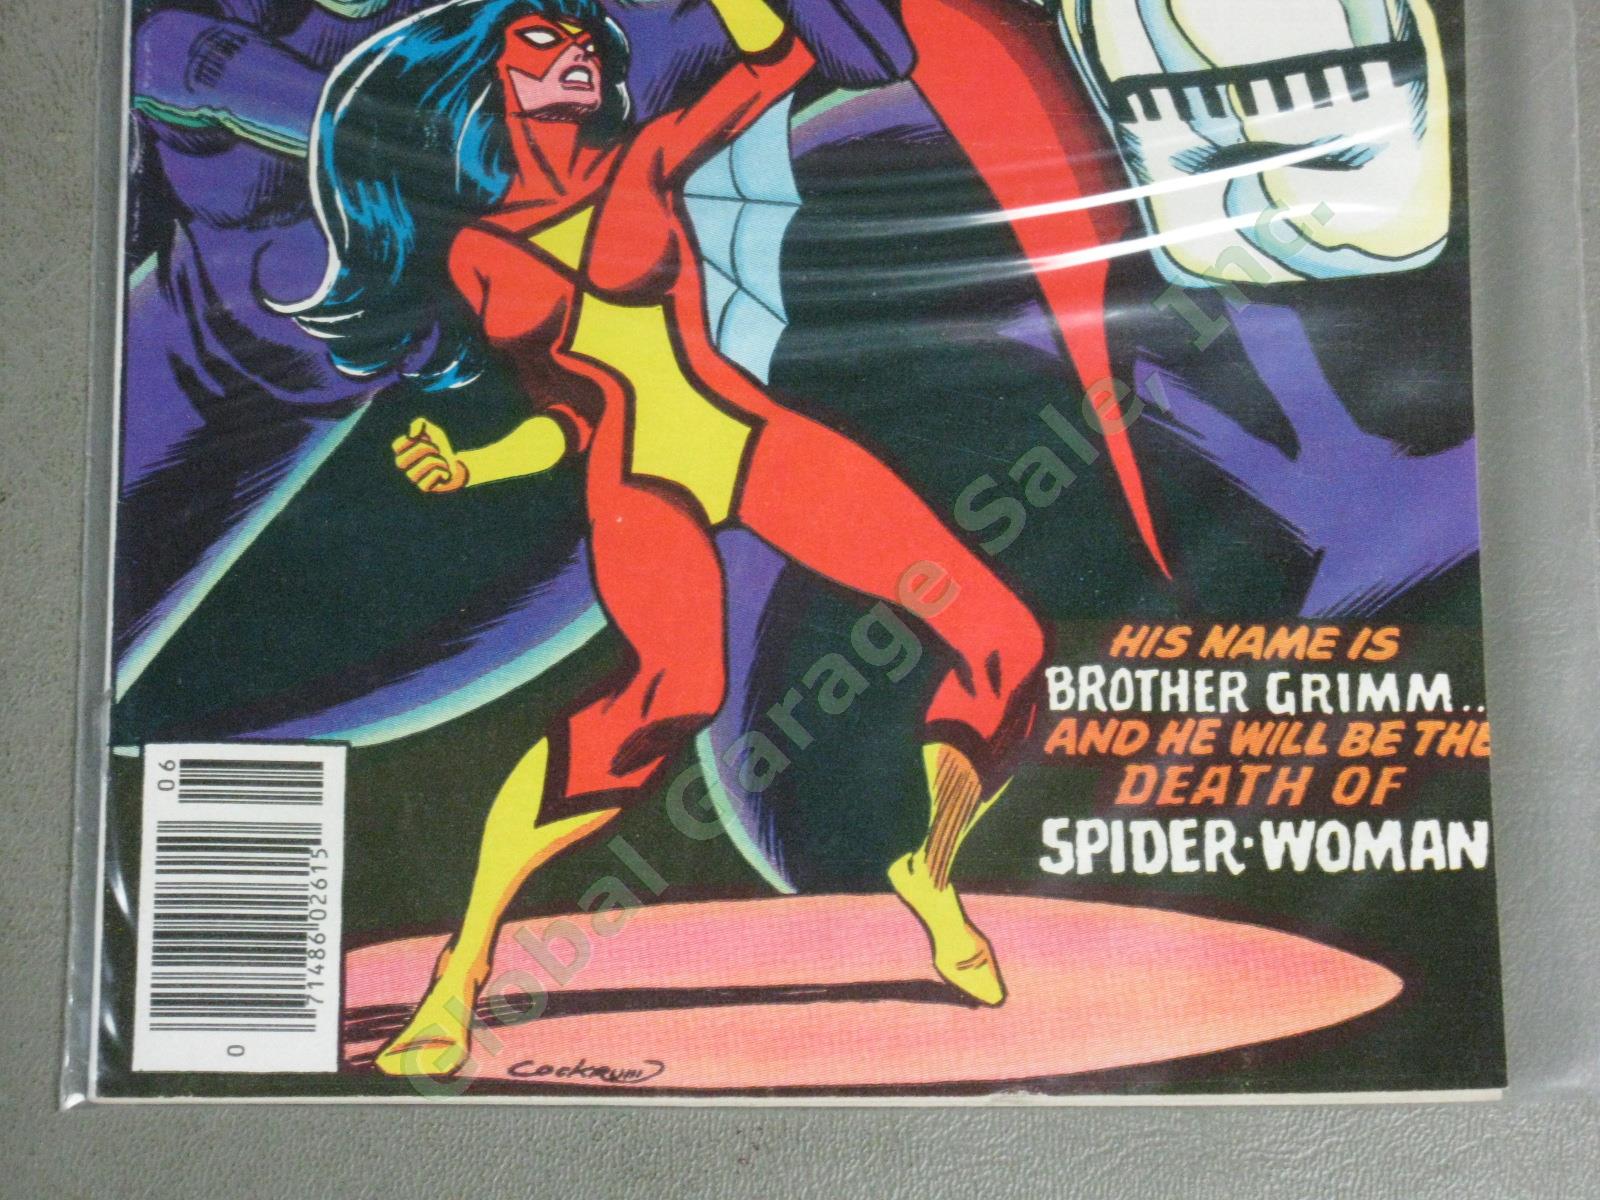 48 Vtg Marvel Spider-Woman Comic Book Collection Lot Runs 1-8 10-36 38-40 42-50 6